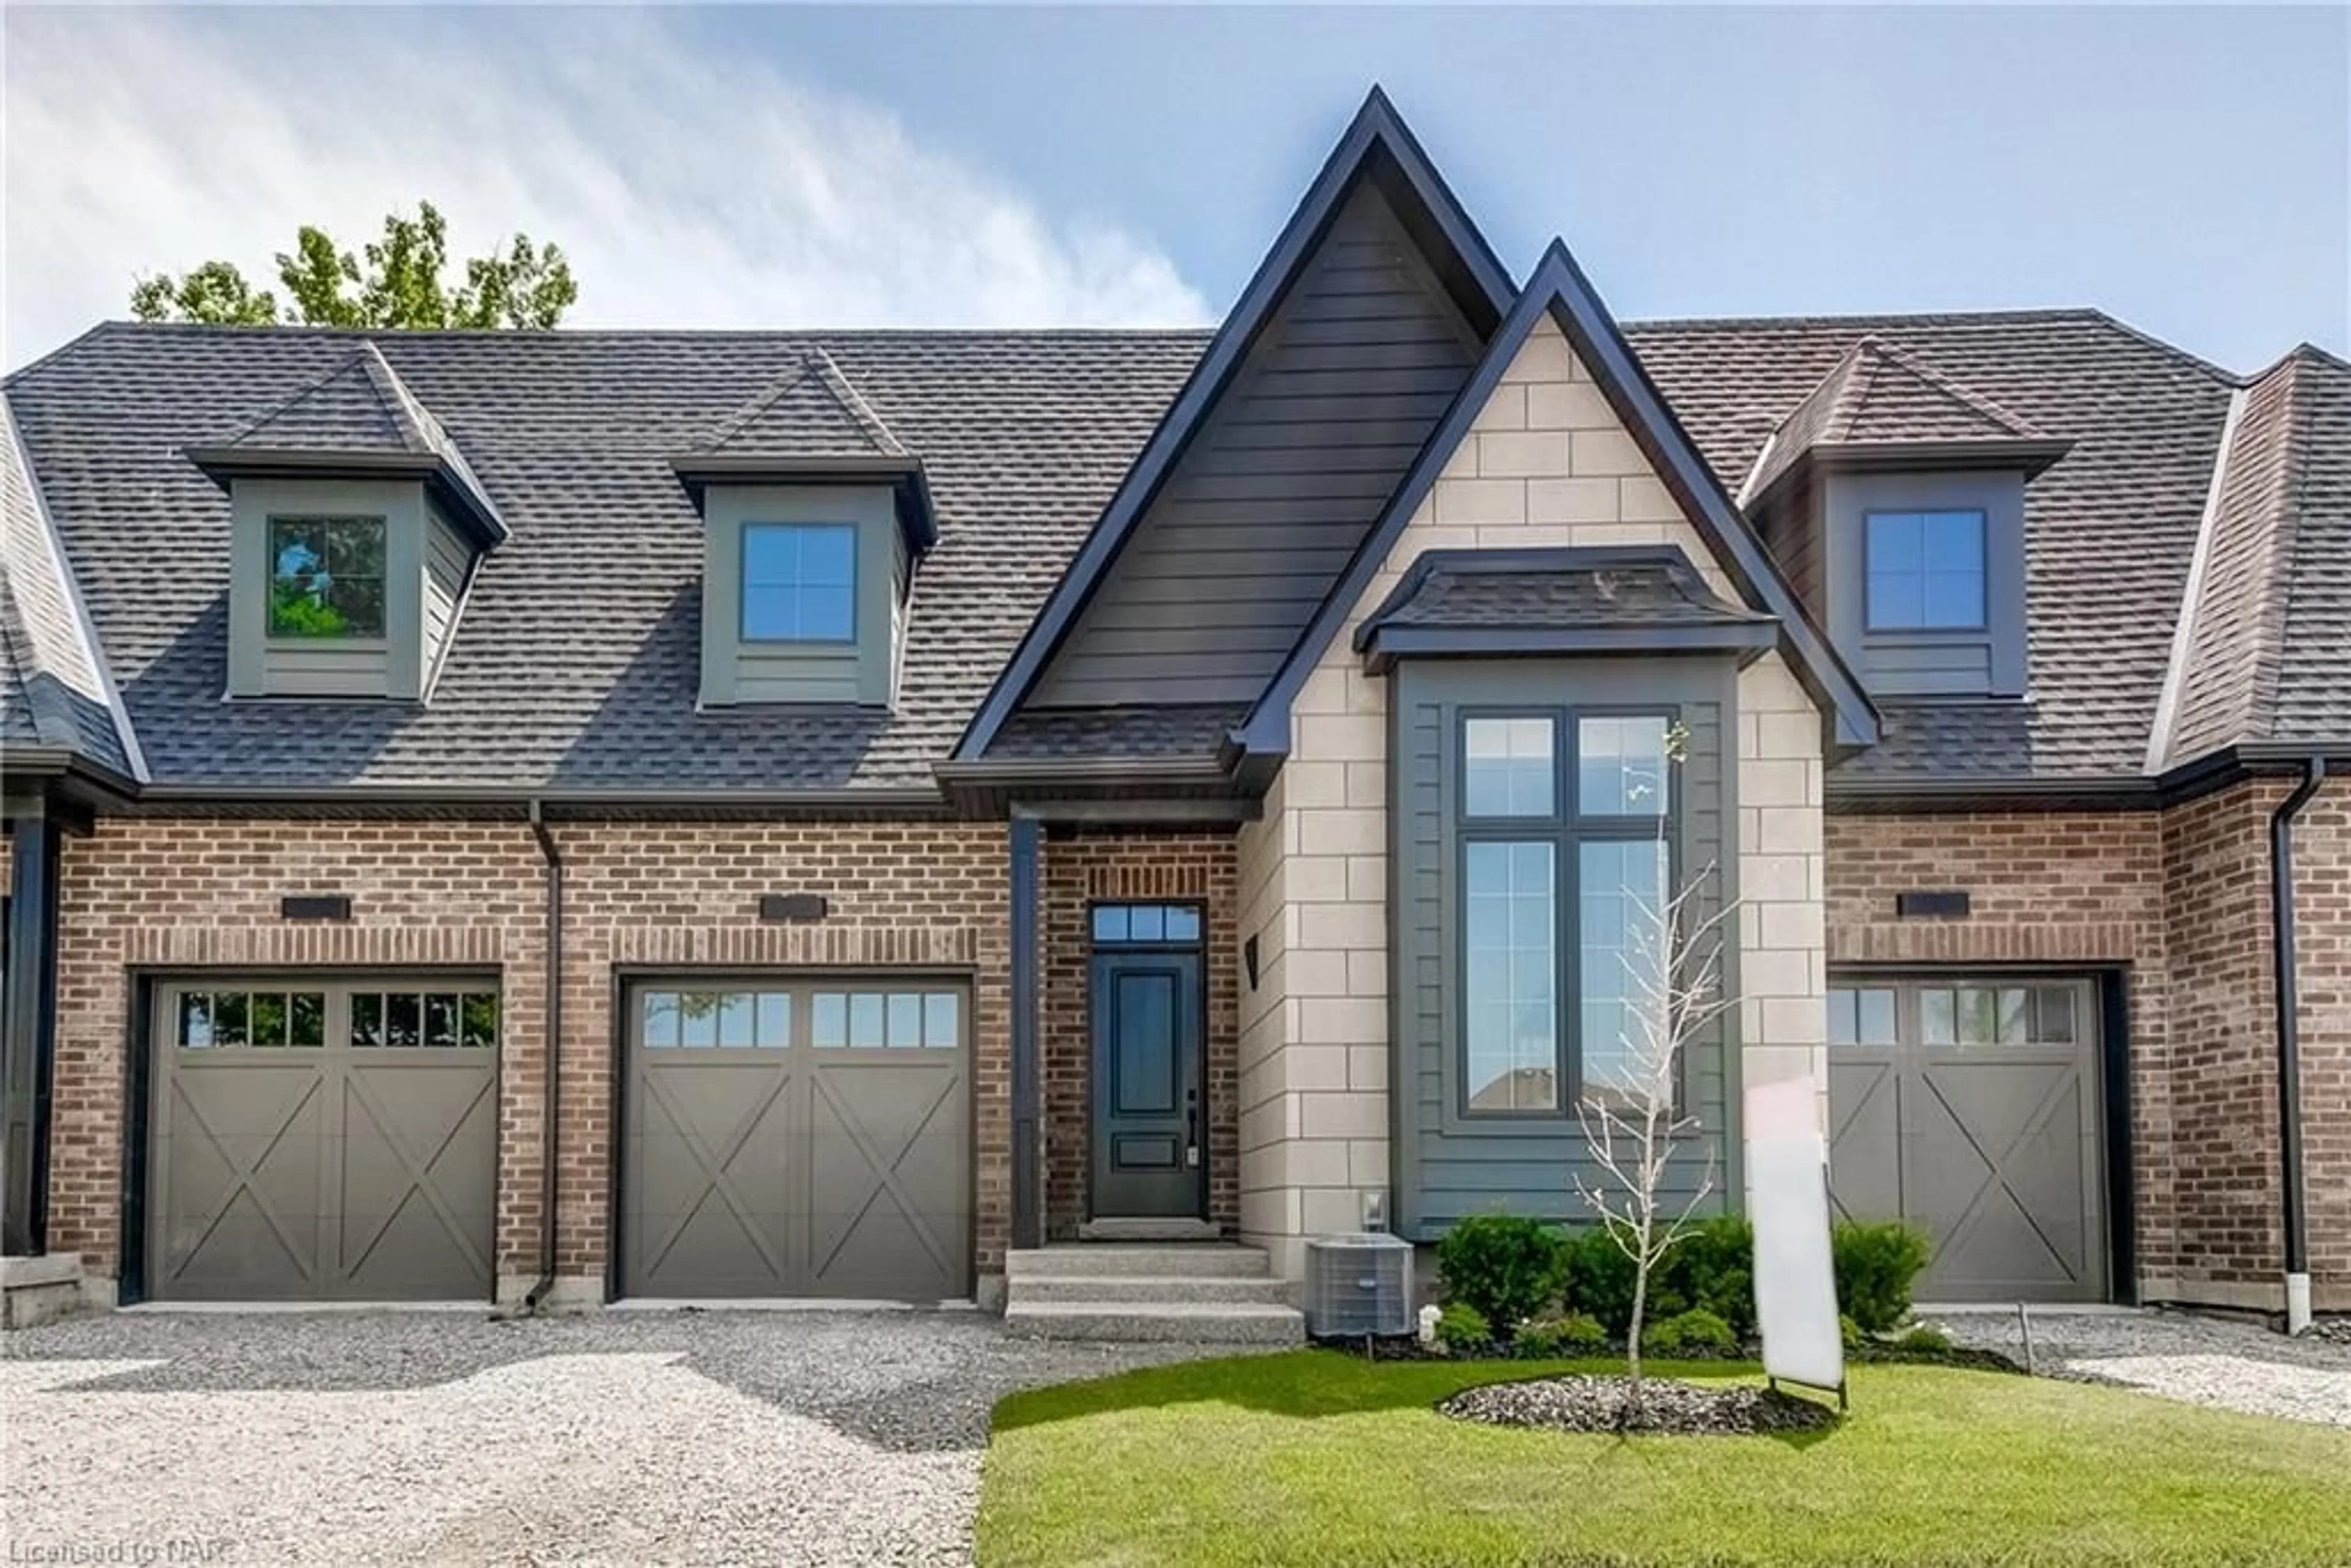 Home with brick exterior material for 25 Sorensen Crt #3, Niagara-on-the-Lake Ontario L0S 1J0